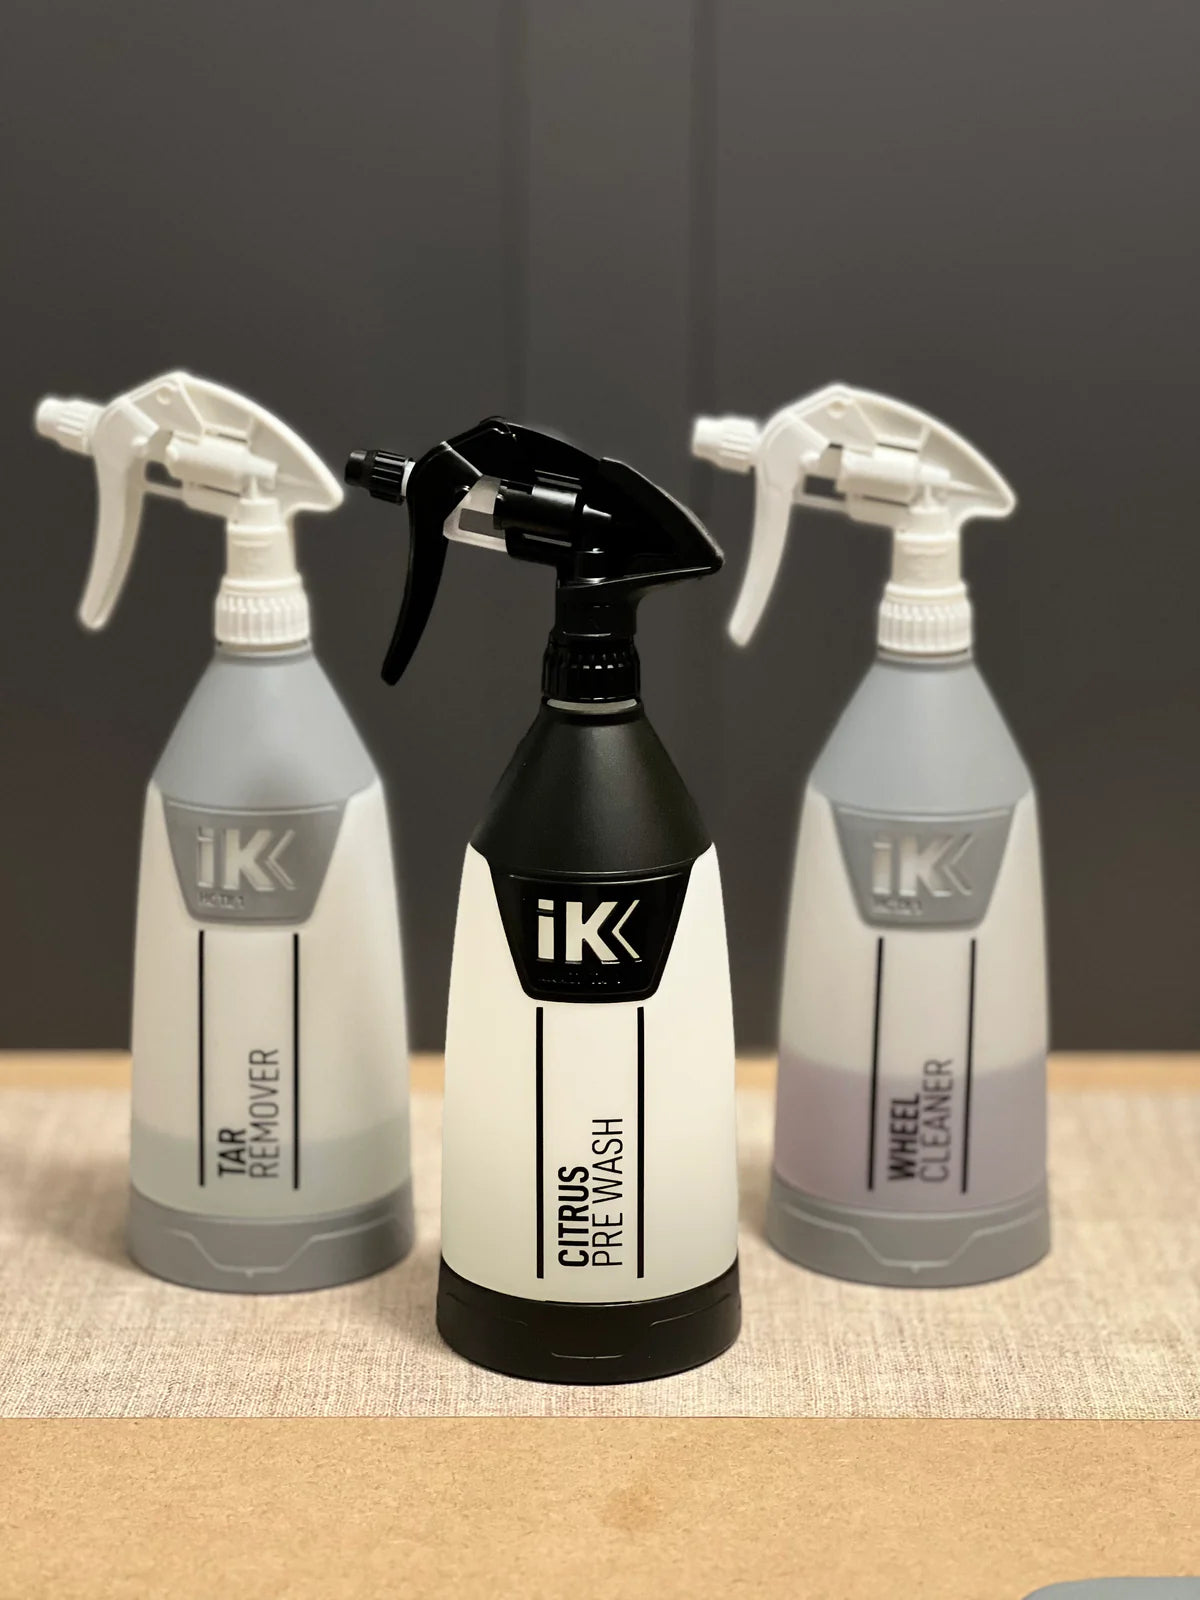 Bottles and Sprayers – in2Detailing